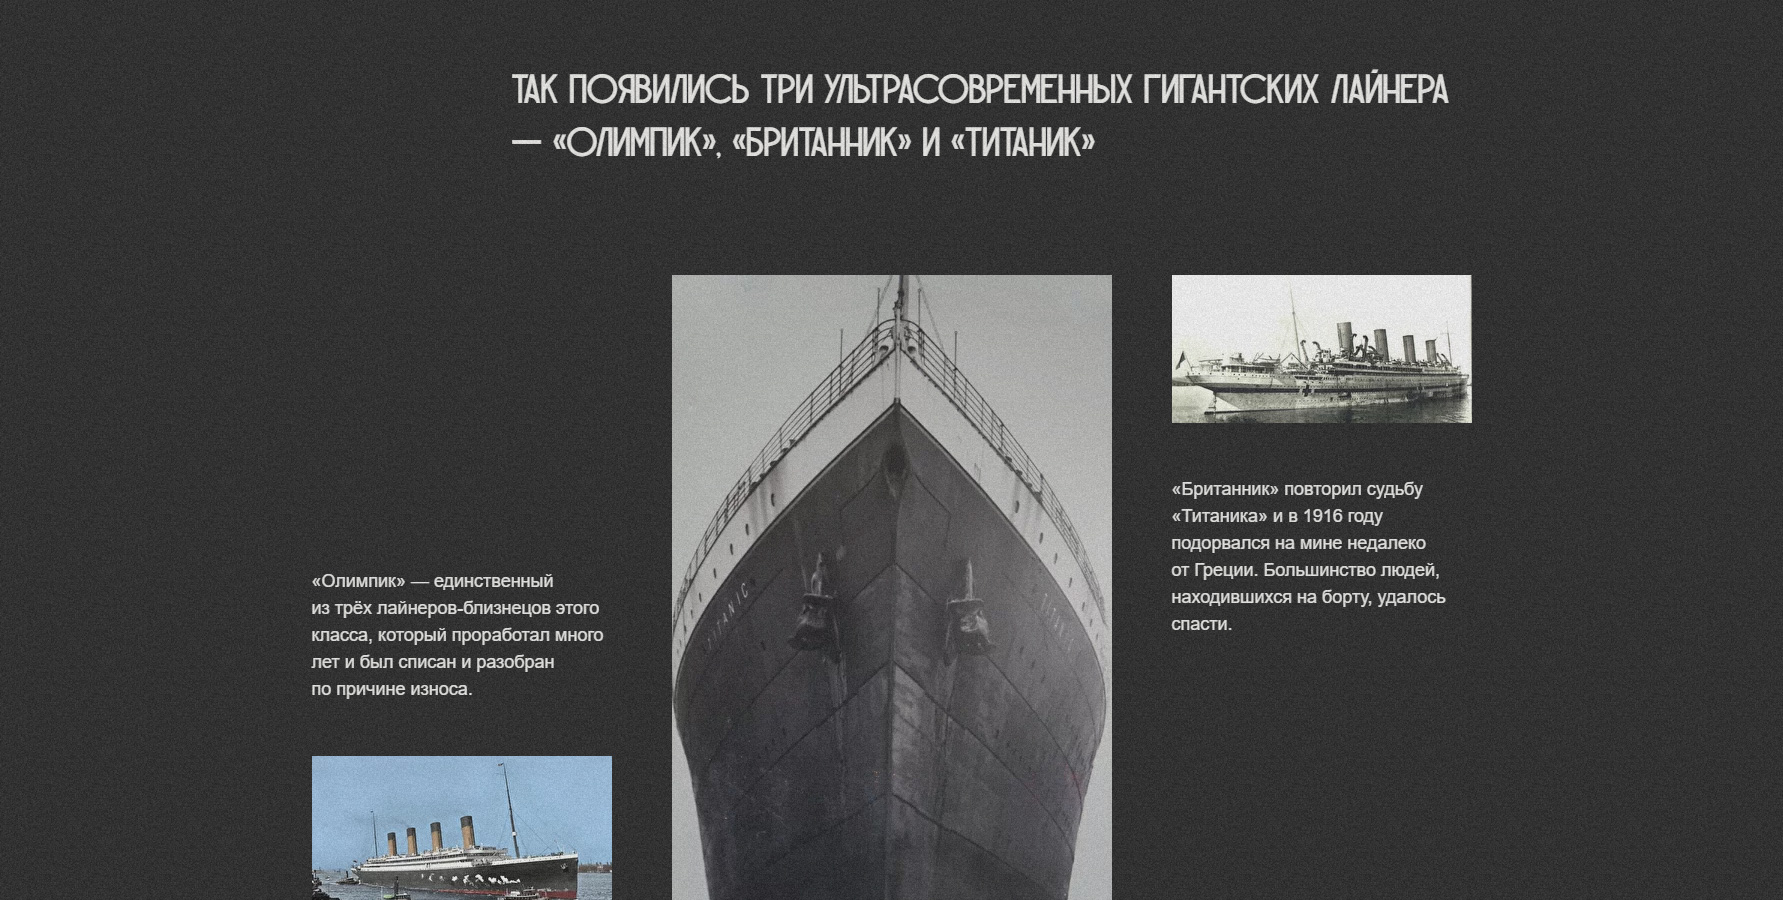 The tragic story of Titanic - Website of the Day